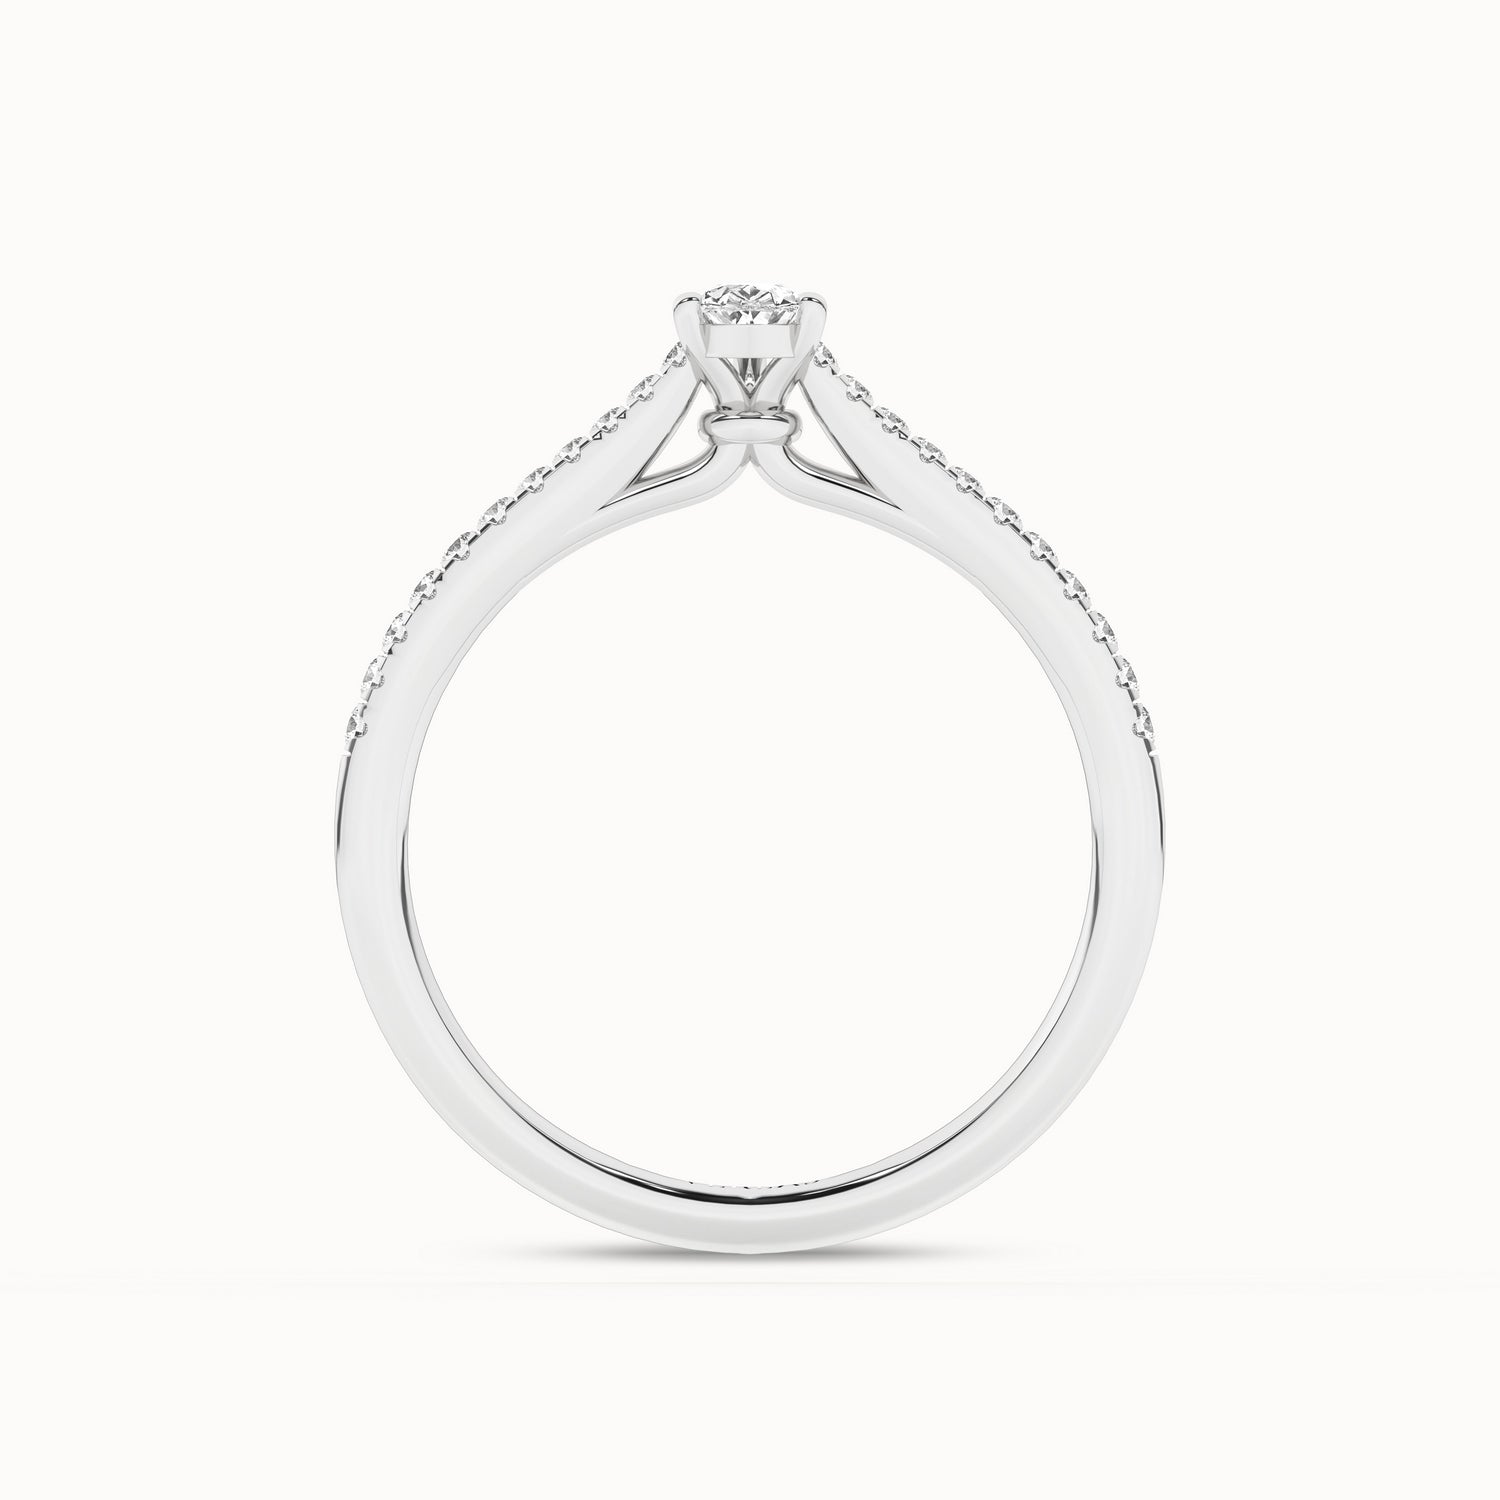 Signature Dewdrop Ring_Product Angle_1/4-3